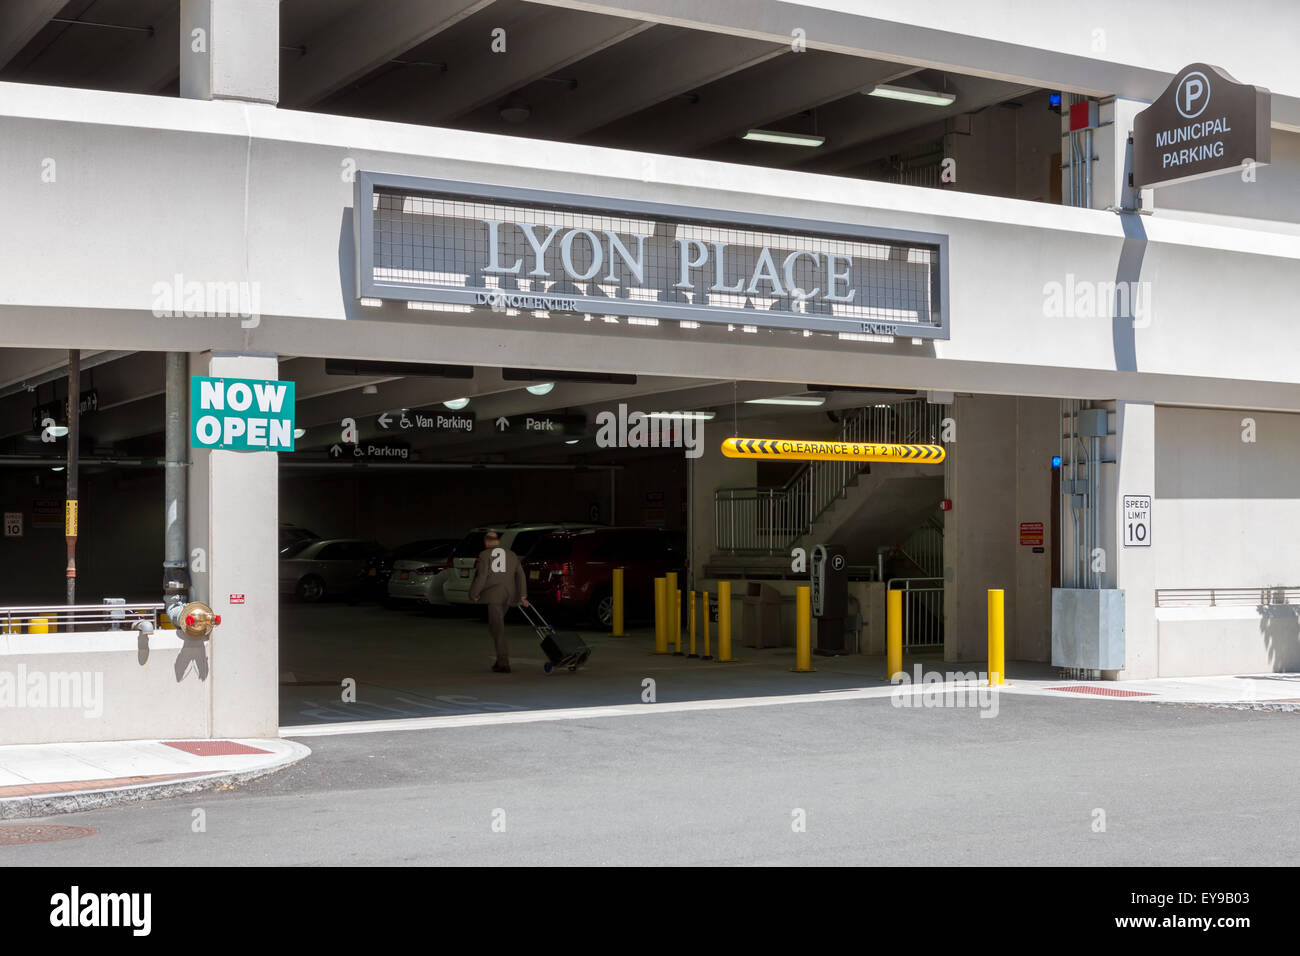 An entrance to the Lyon Place municipal parking garage in White Plains, New York. Stock Photo